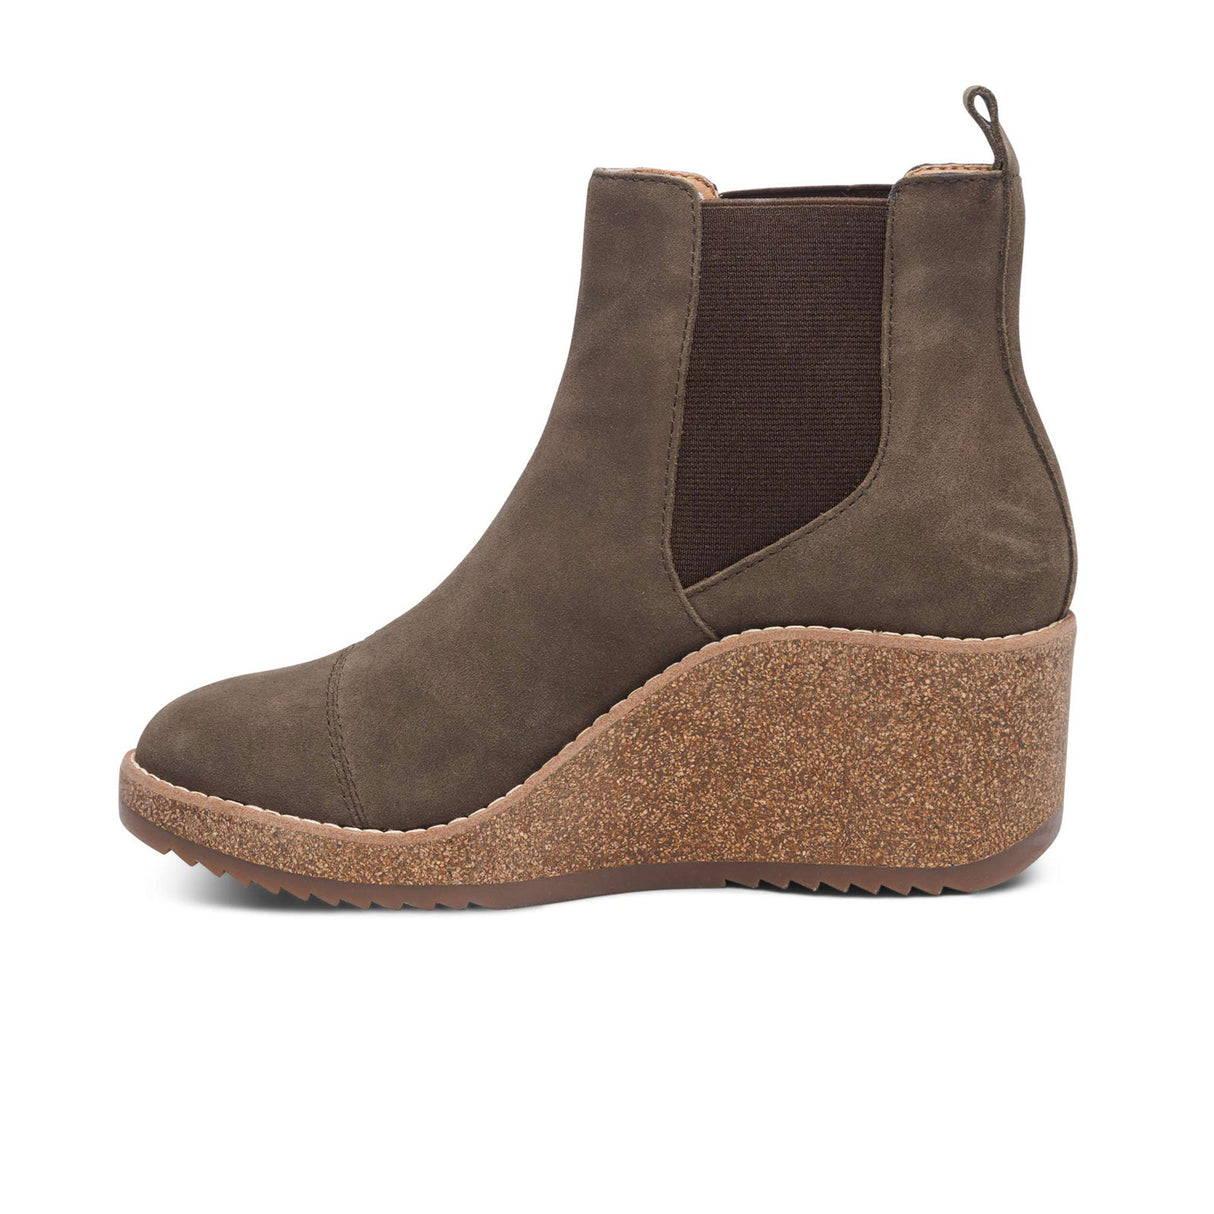 Aetrex Dawn Wedge Boot (Women) - Olive Boots - Fashion - Wedge - The Heel Shoe Fitters